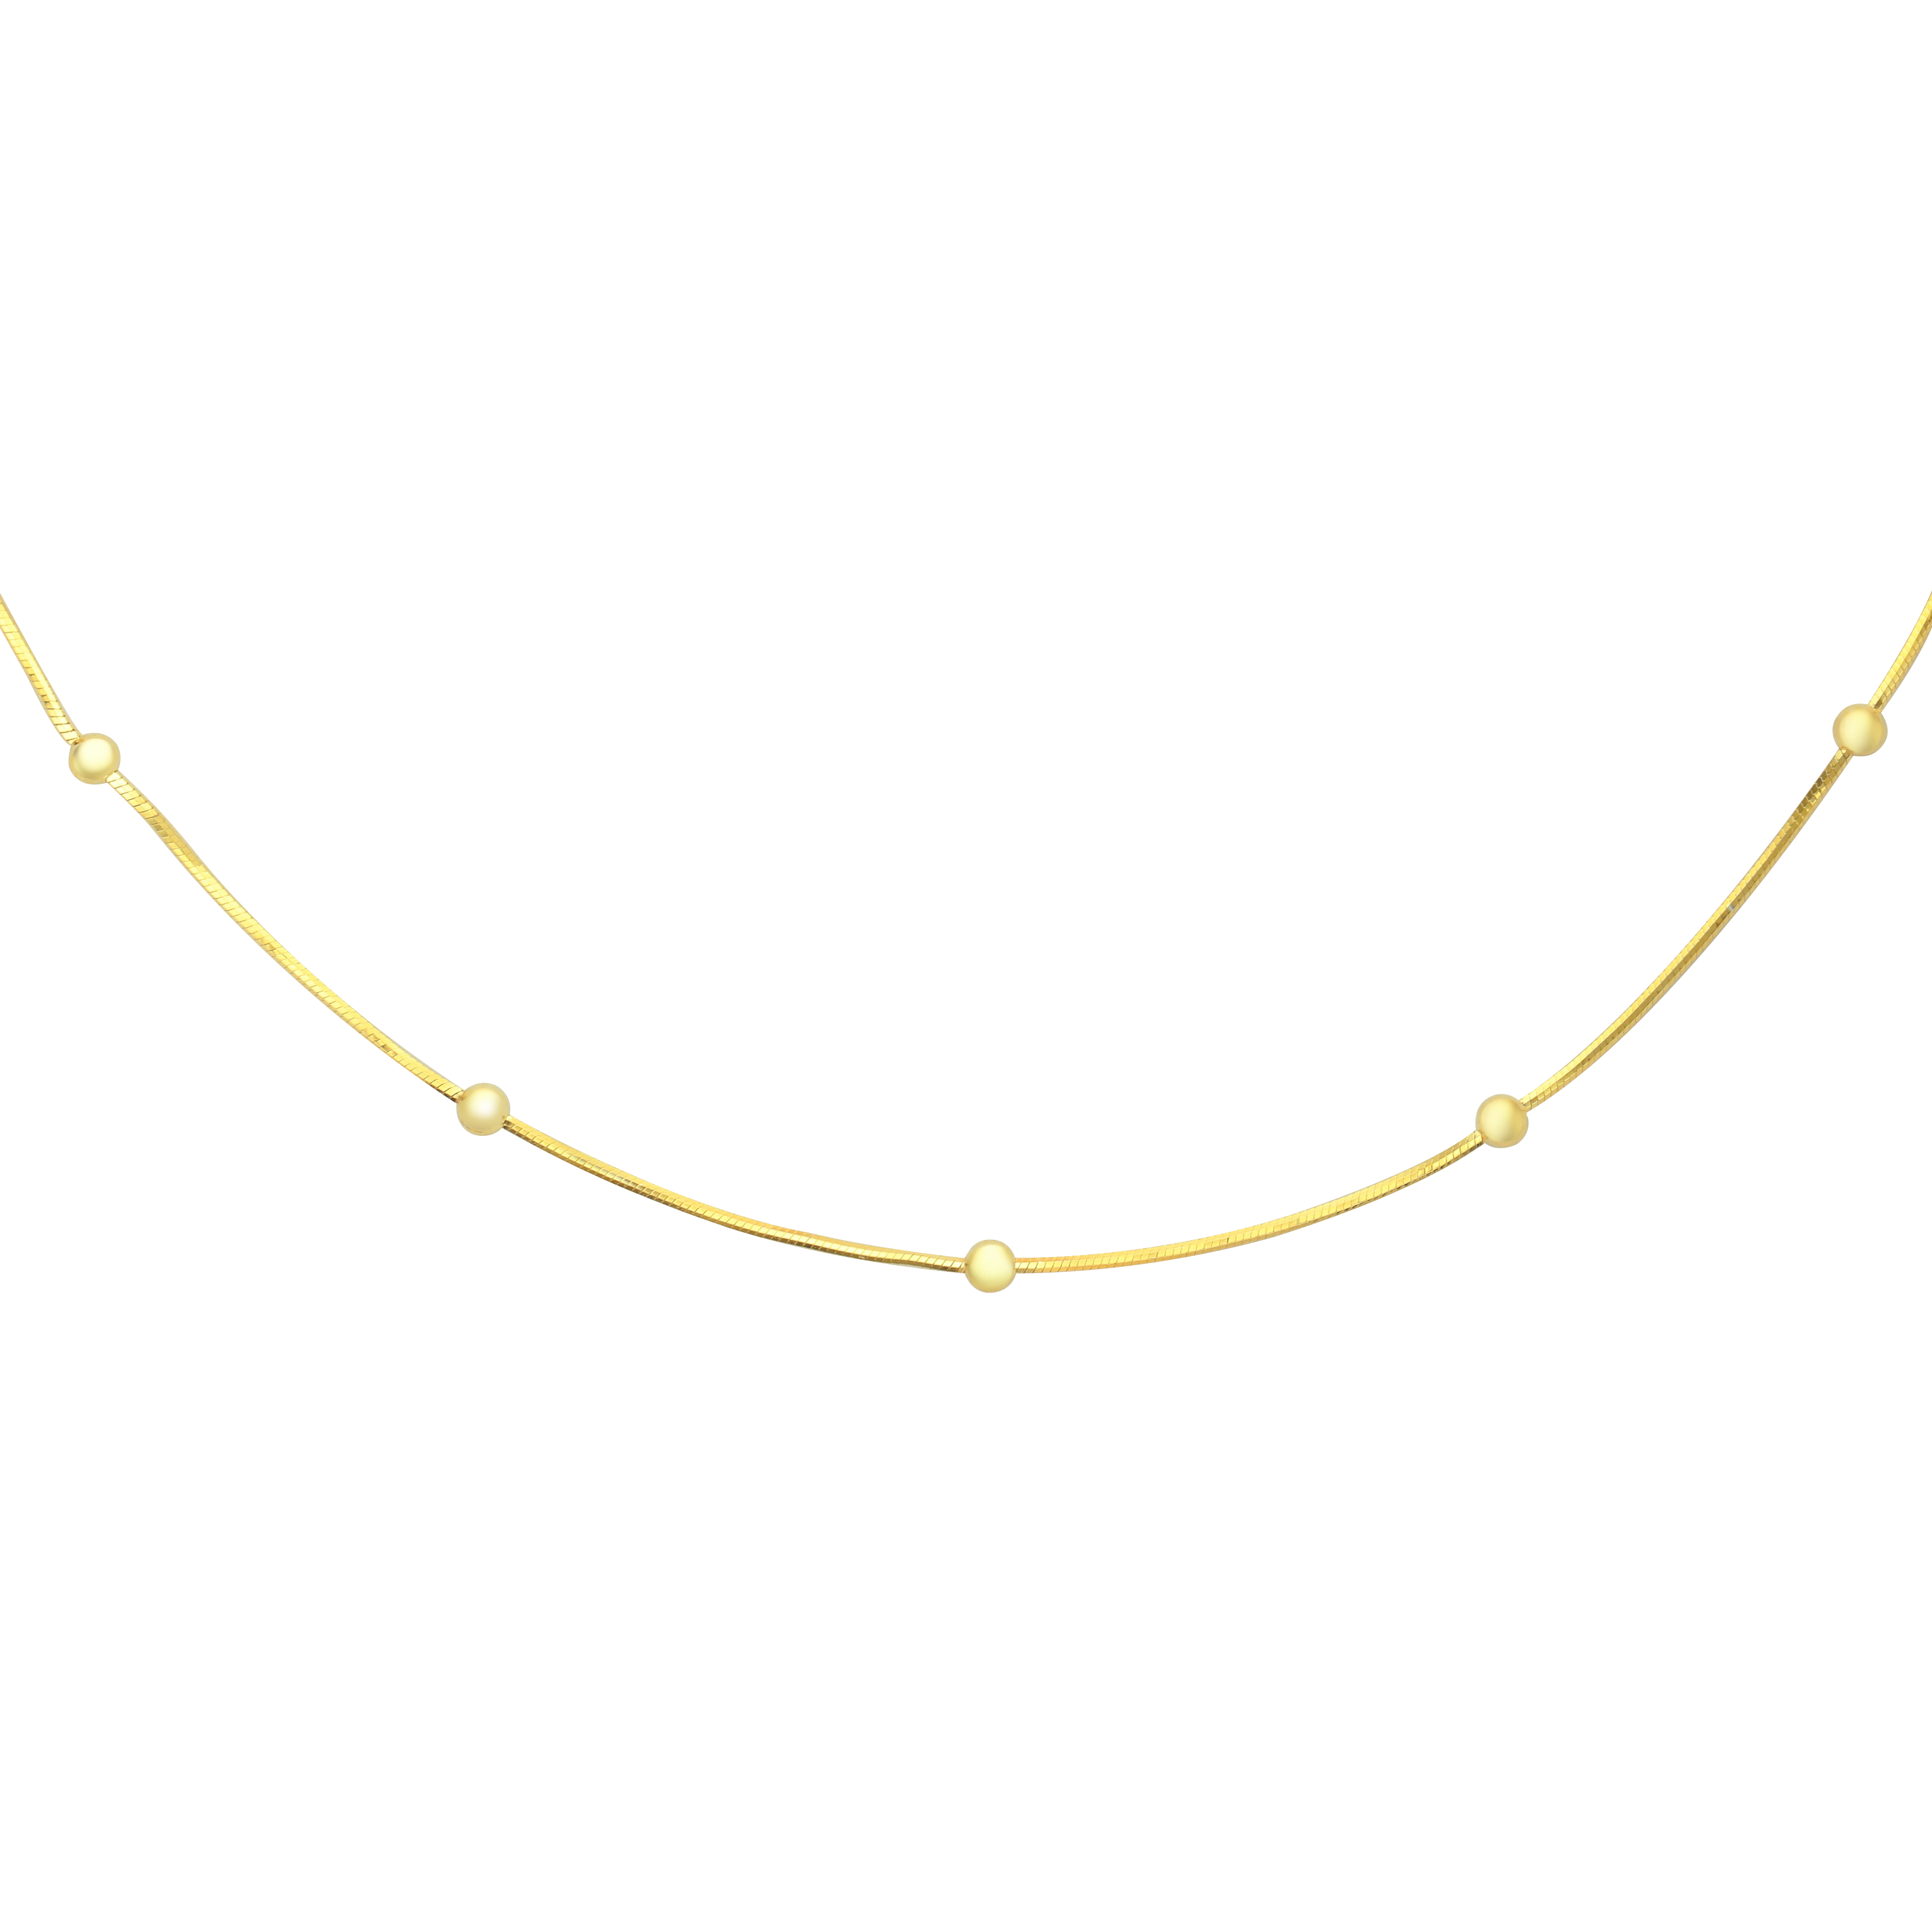 0.7MM Chain with 2MM Beads Necklace,Solid 925 Solid Sterling Silver Gold Plated Snake Necklace Chain 16Inches with 2Inch Extension Chain 1320032 - Click Image to Close